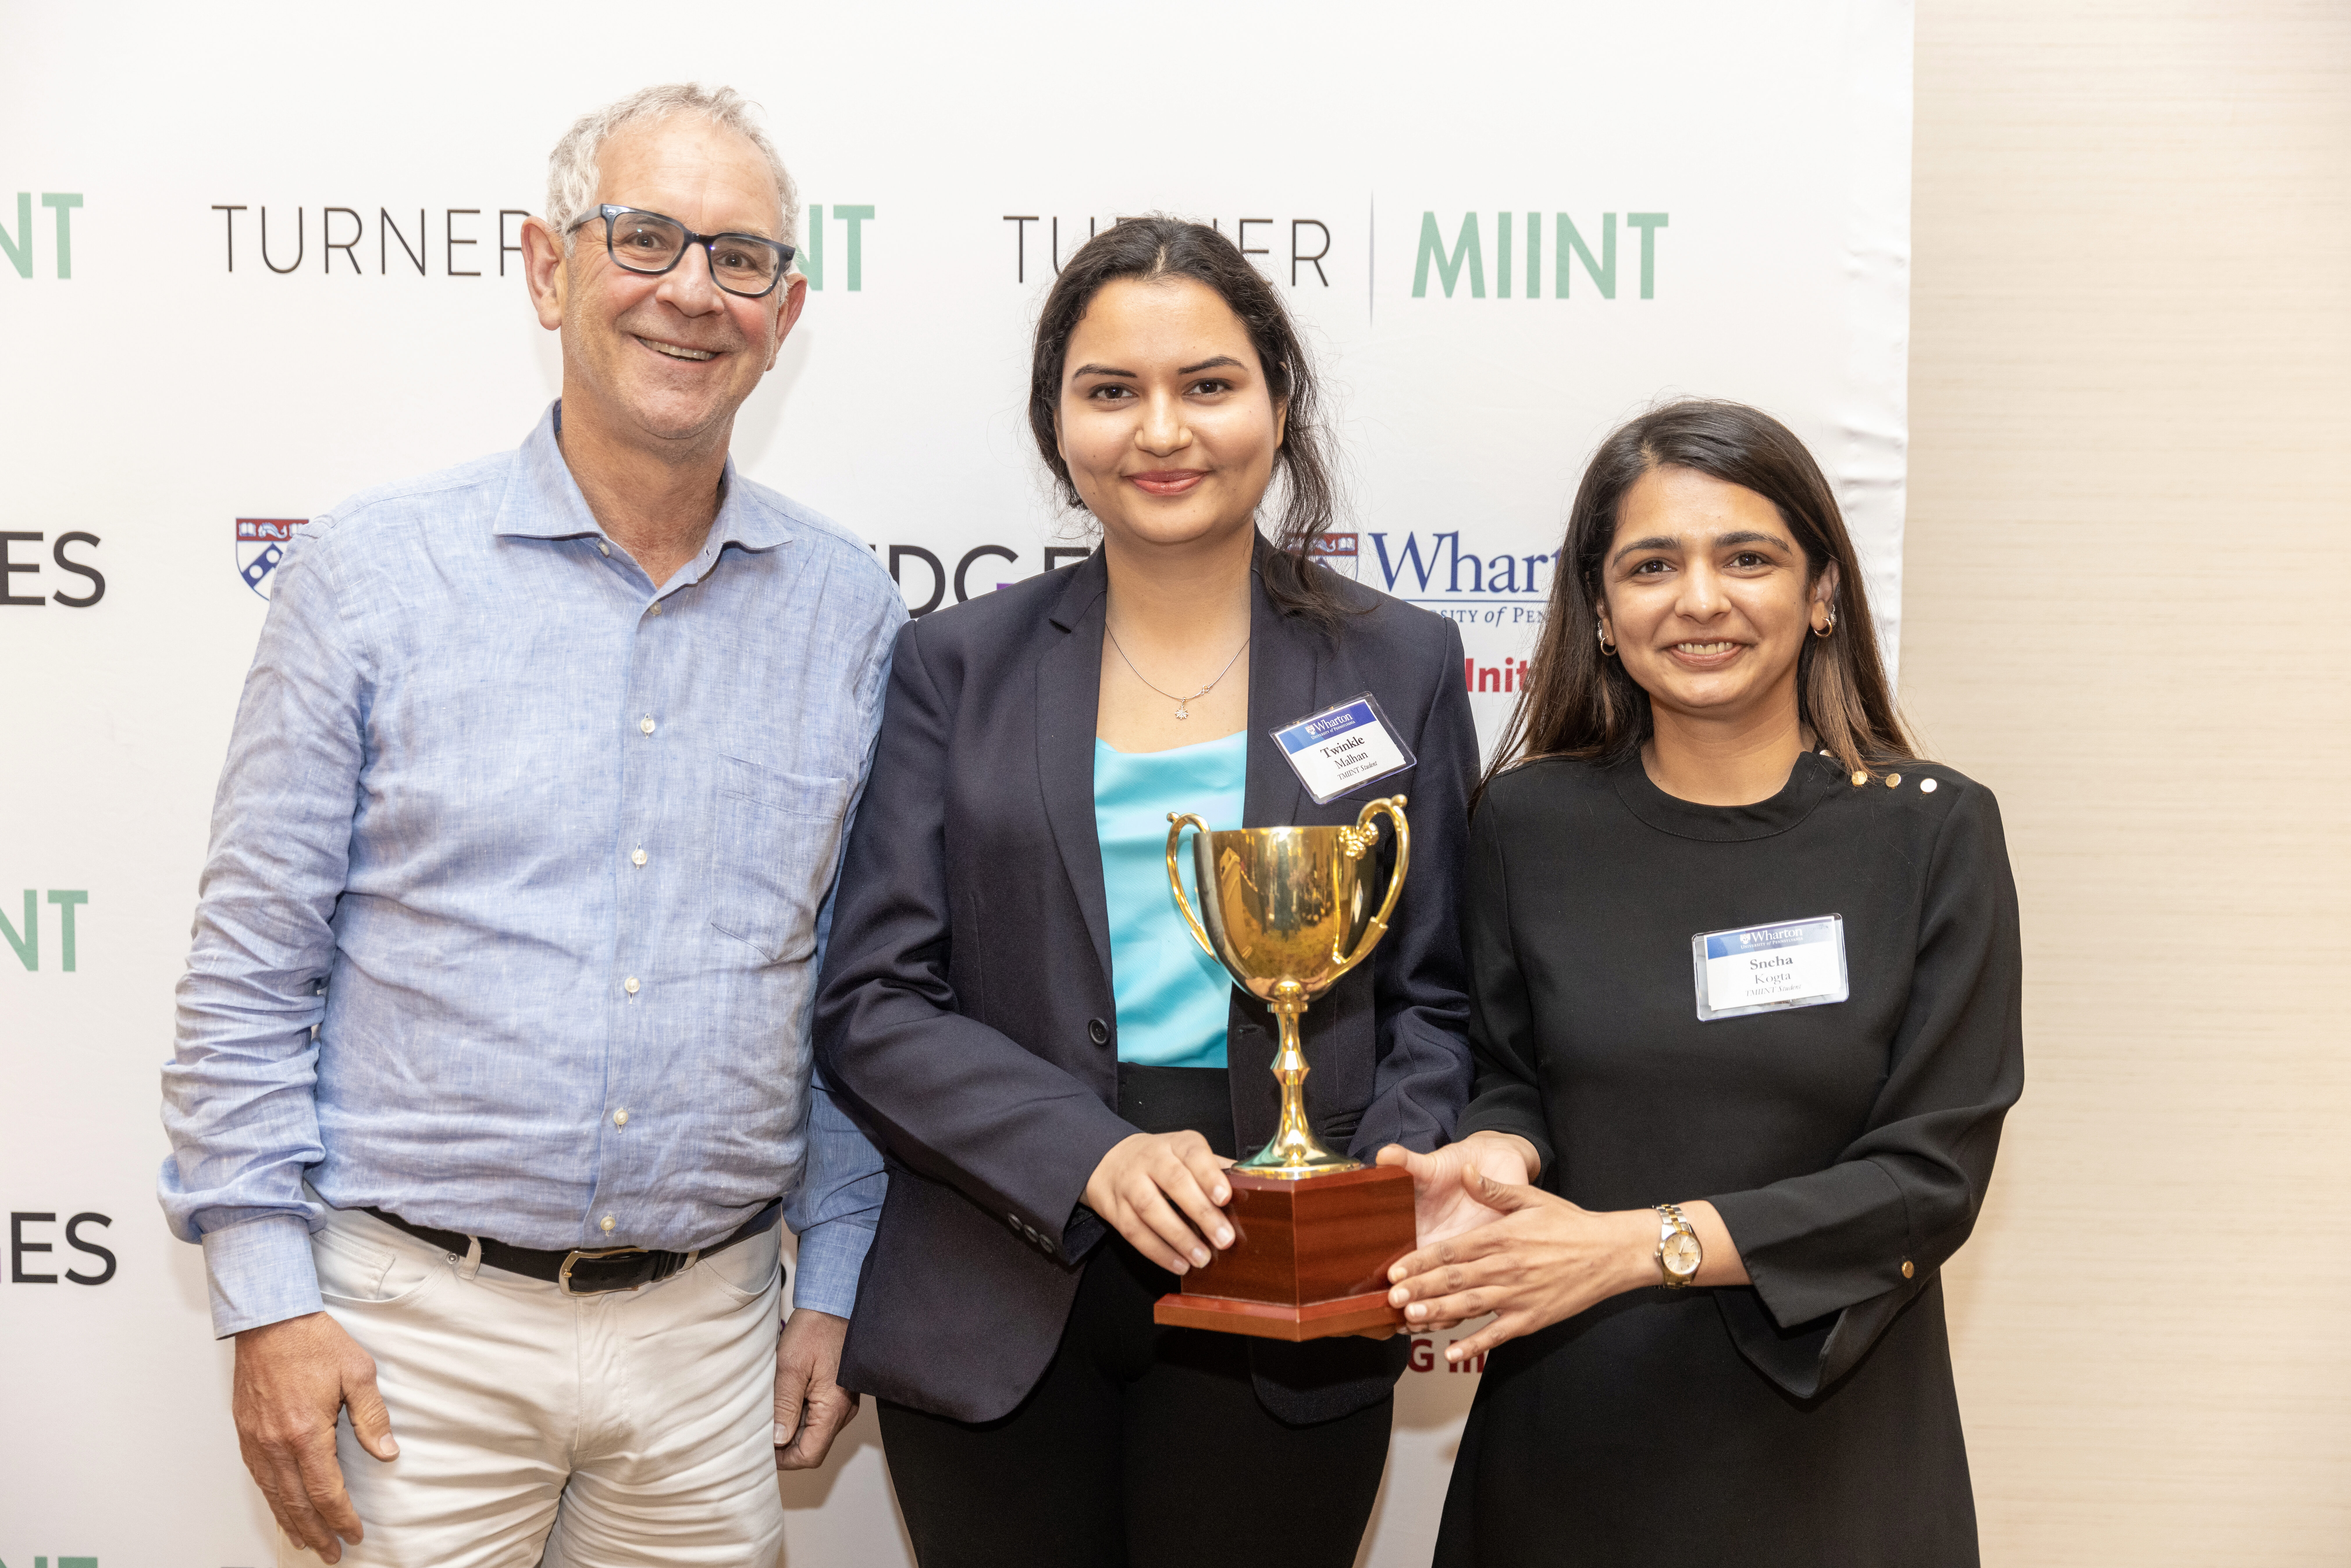 Ron Moelis poses with Twinkle Malhan and Sneha Kogta of the Saïd Business School Team. They're holding a gold tropy in front of a banner that says Turner MIINT, Wharton ESG Initiative, and Bridges Impact Foundation.